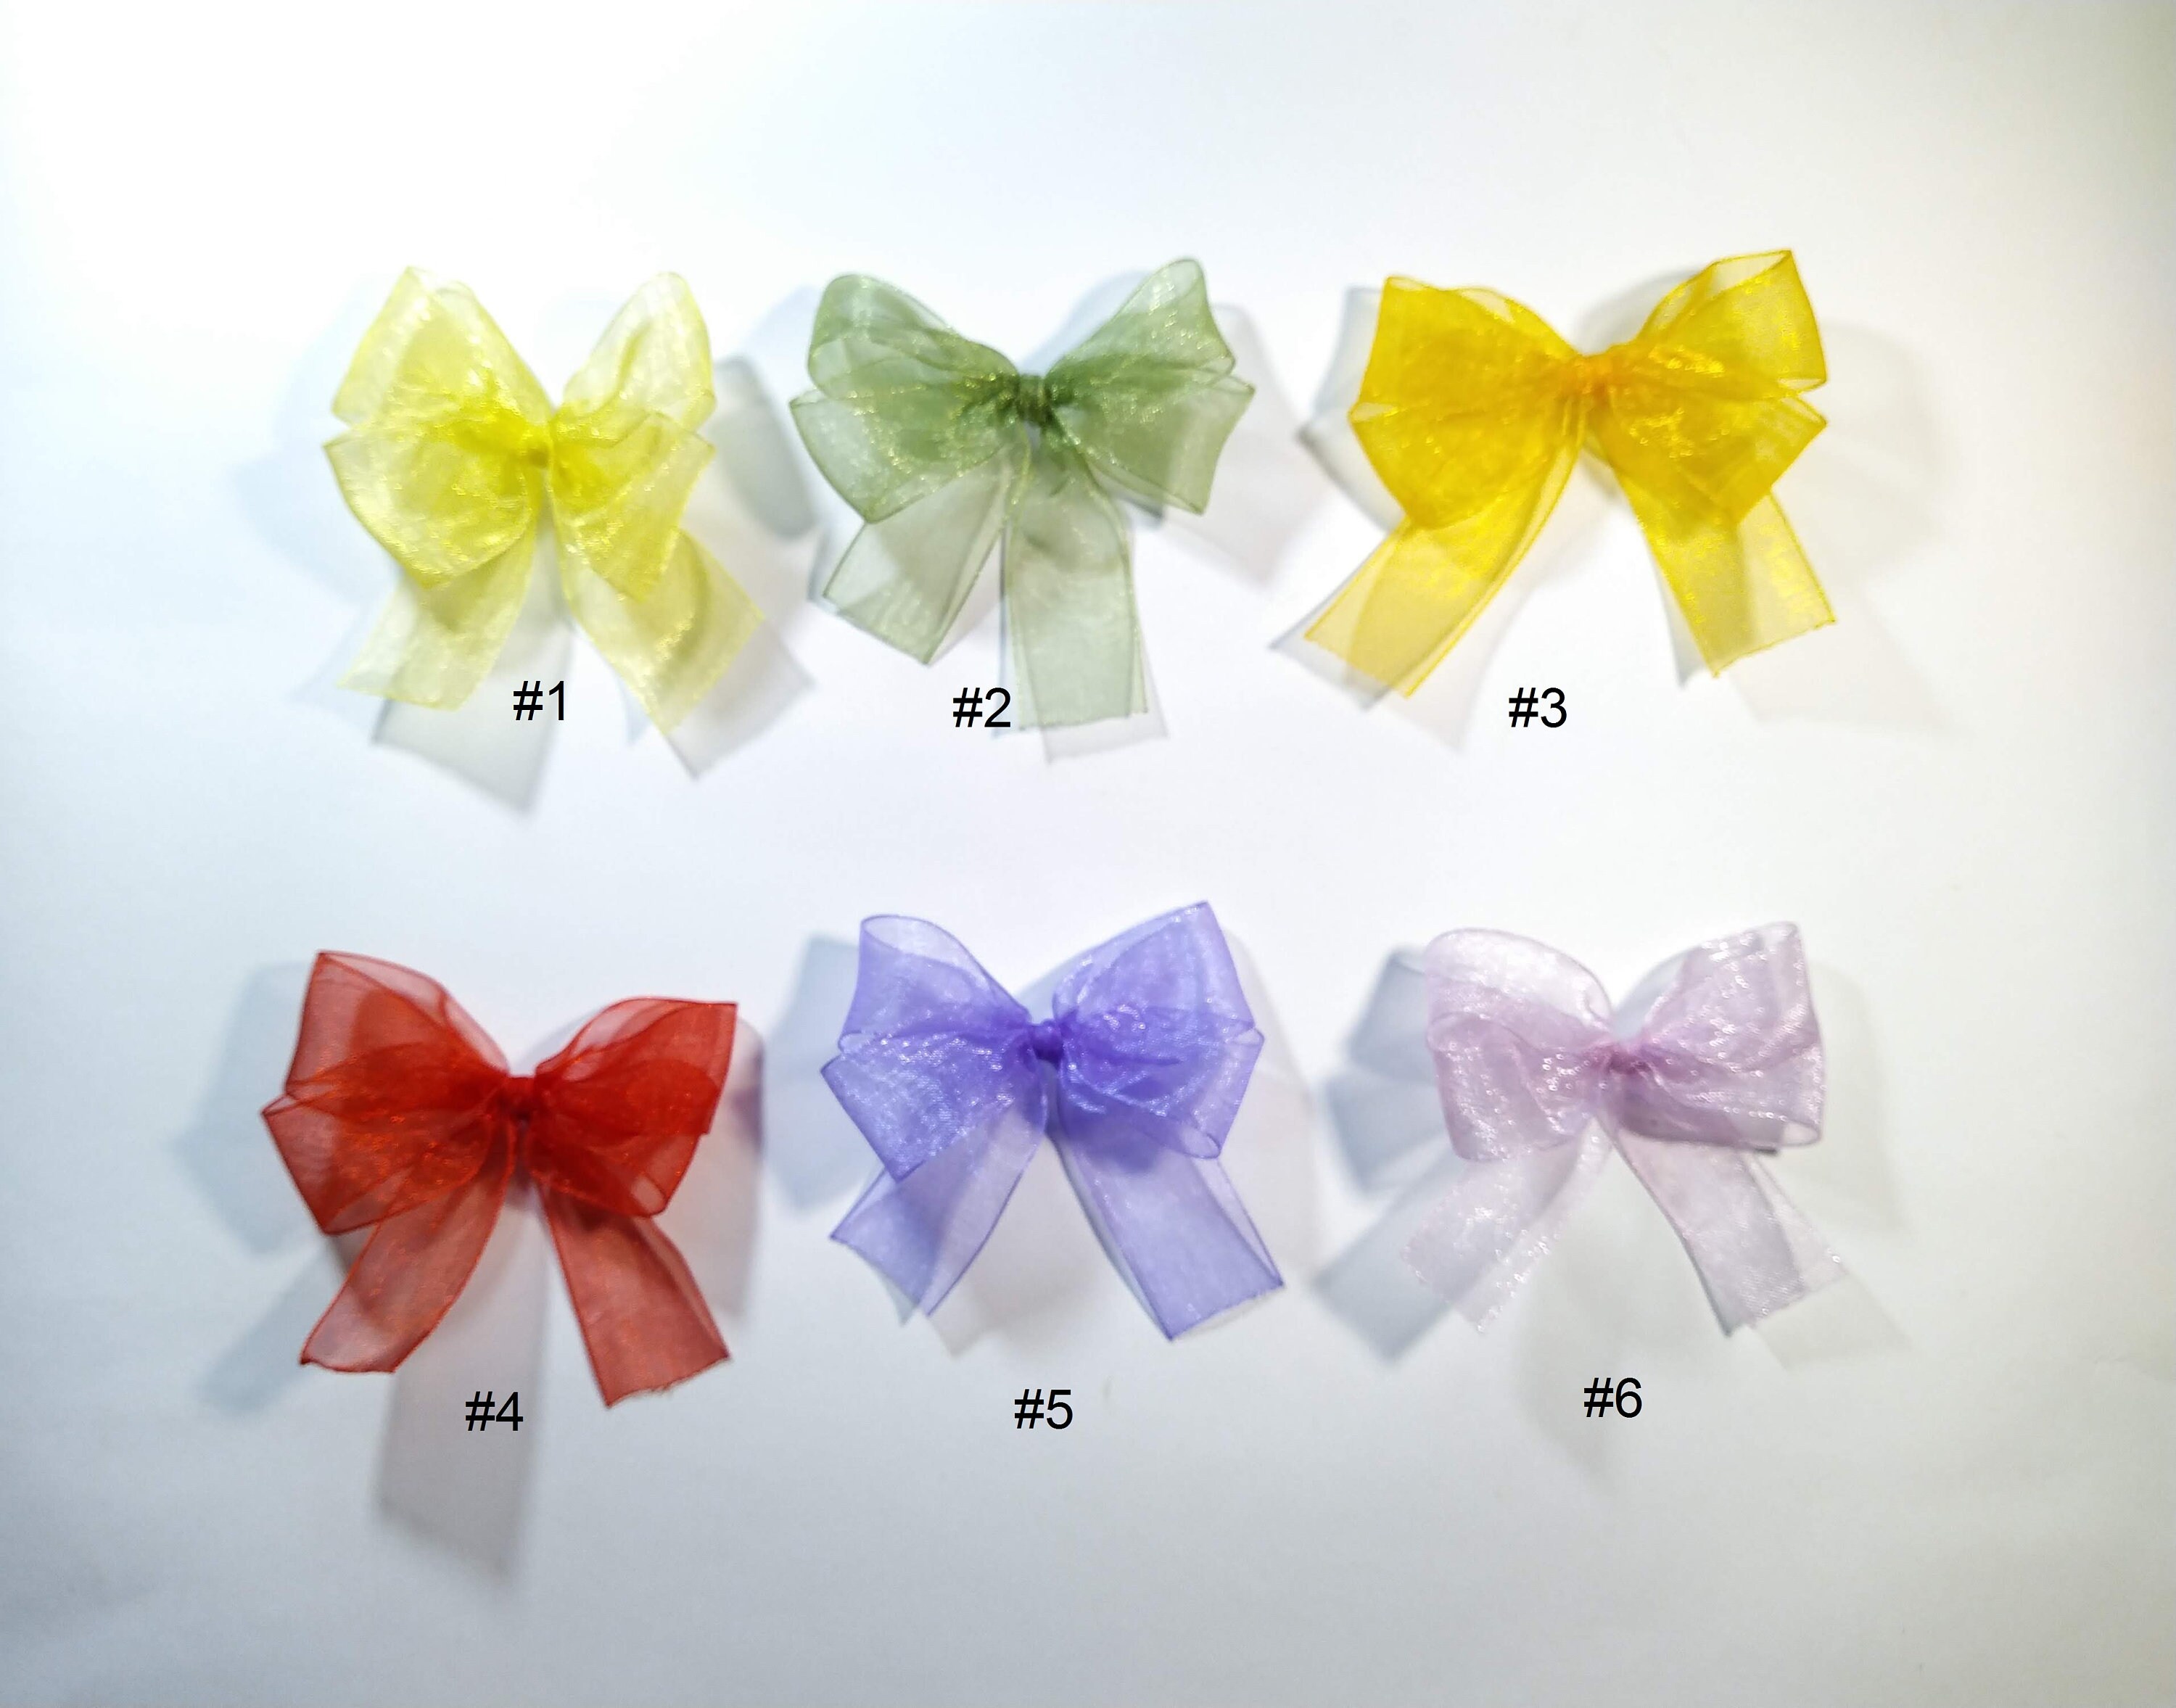 10pcs 7 Inch Large Pull Bow Gift Wrapping Bows Ribbon Organza Cream White